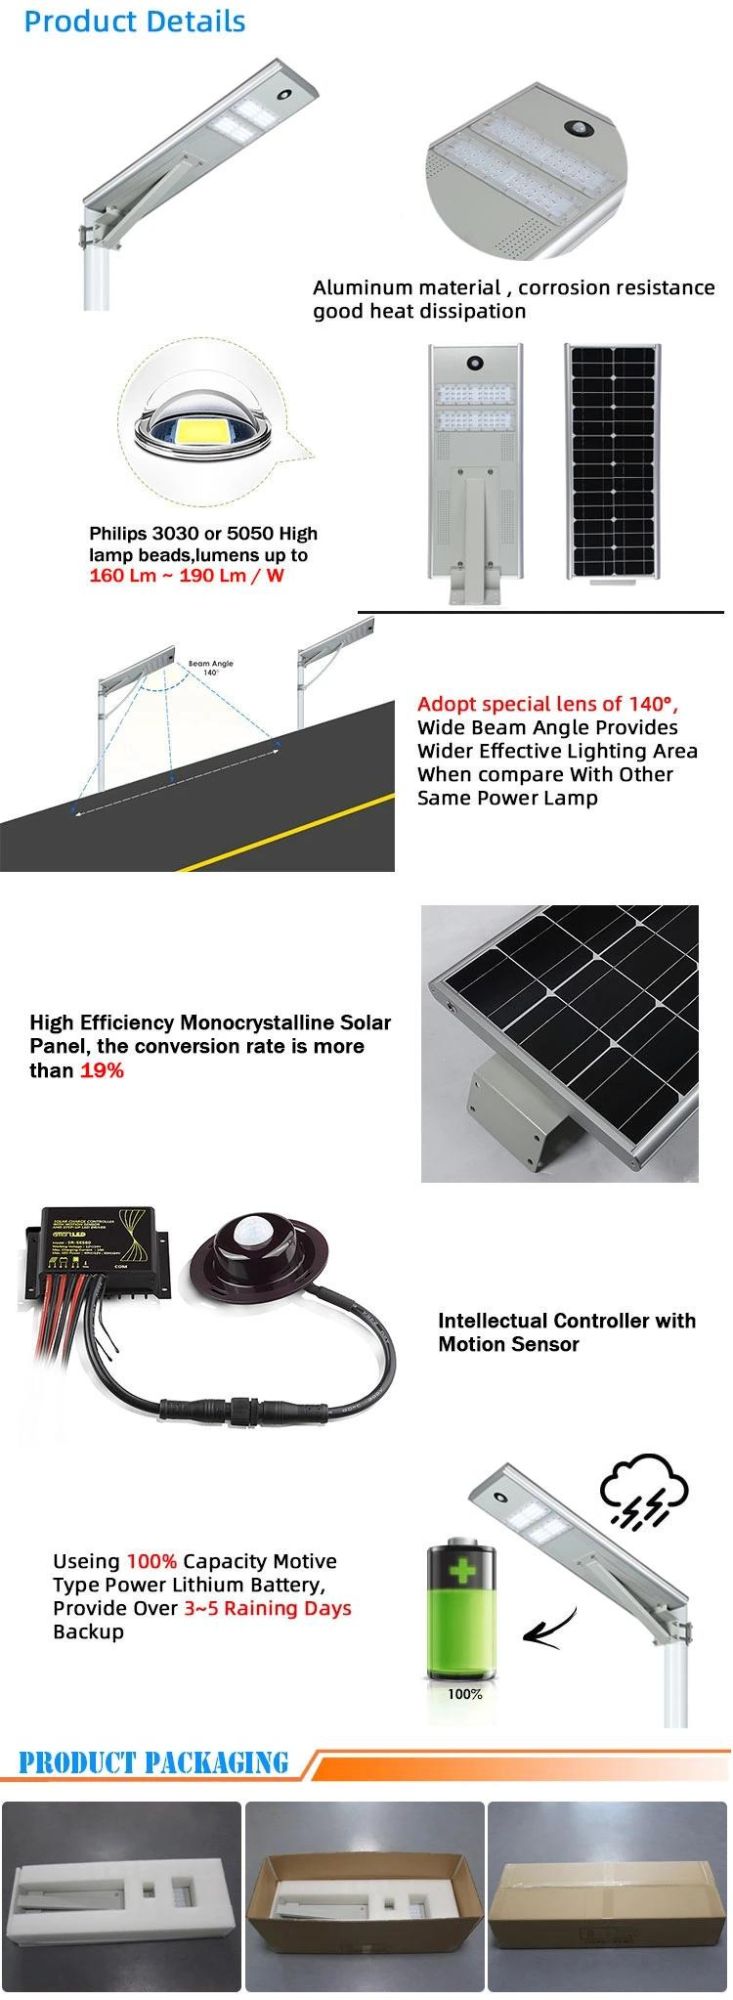 30W All in One LED Integrated Solar Street Light with Portable Sunlight Panel Power From China